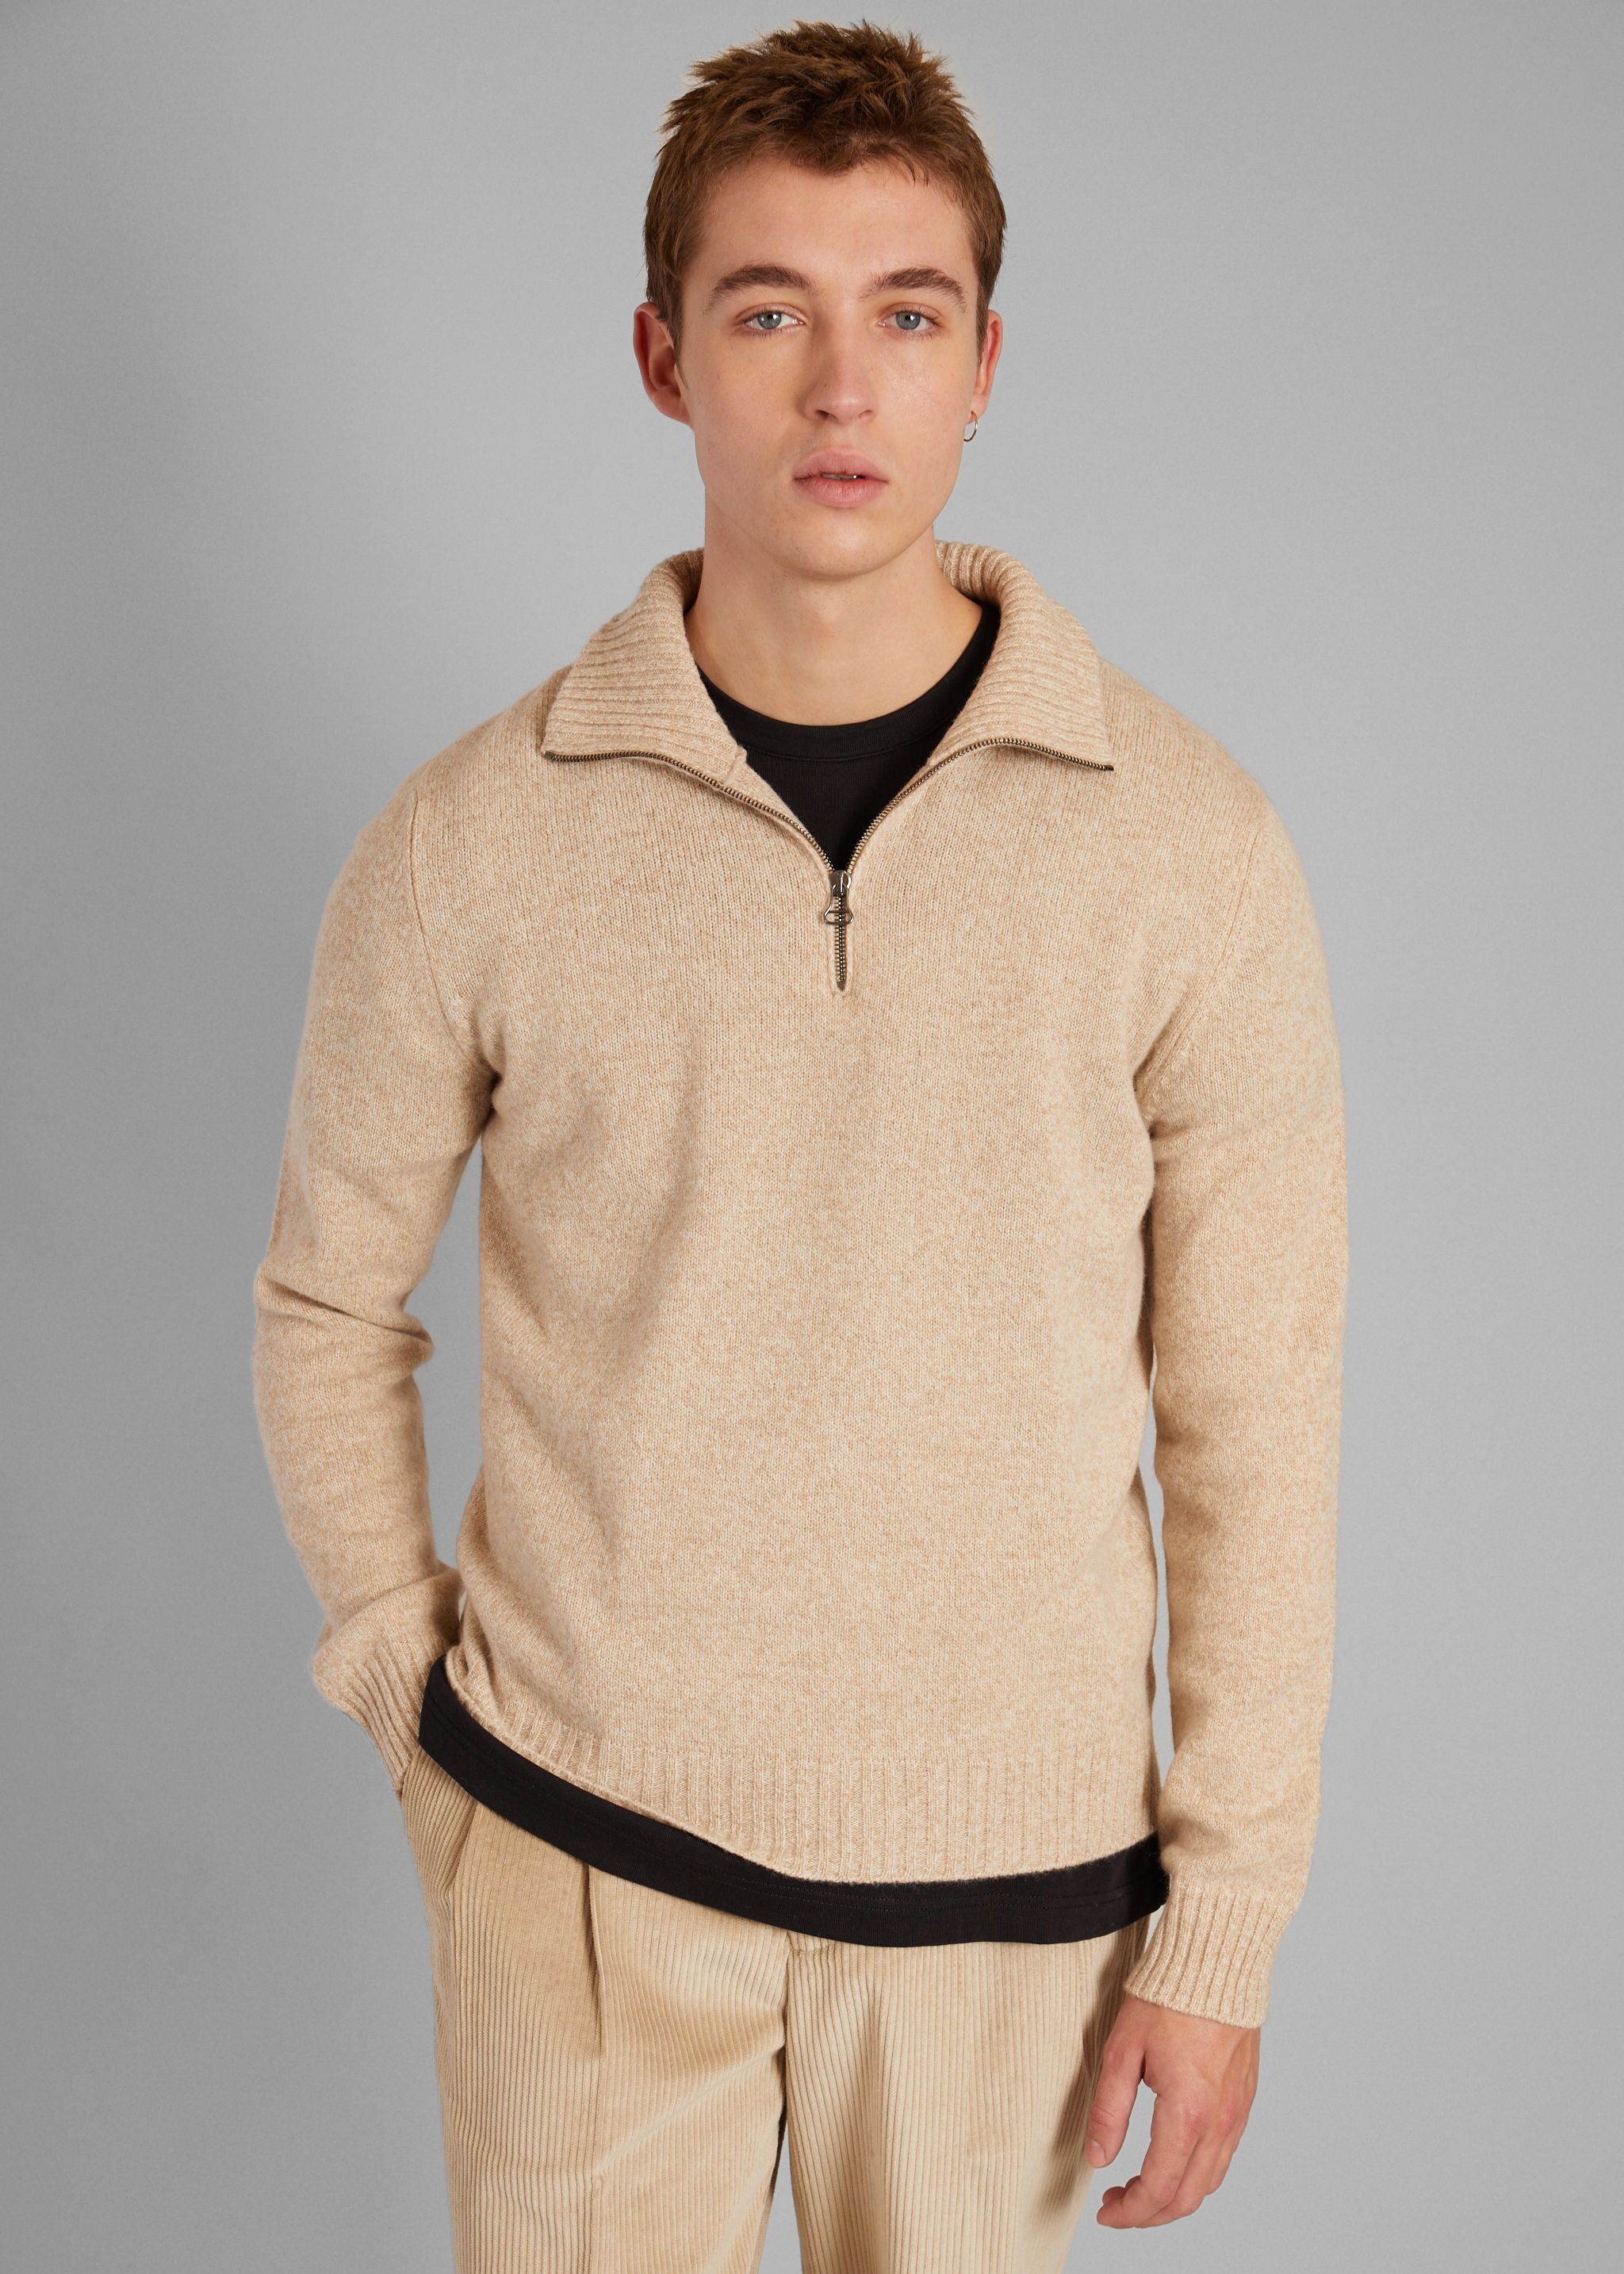 Recycled wool trucker neck sweater - L'Exception Paris